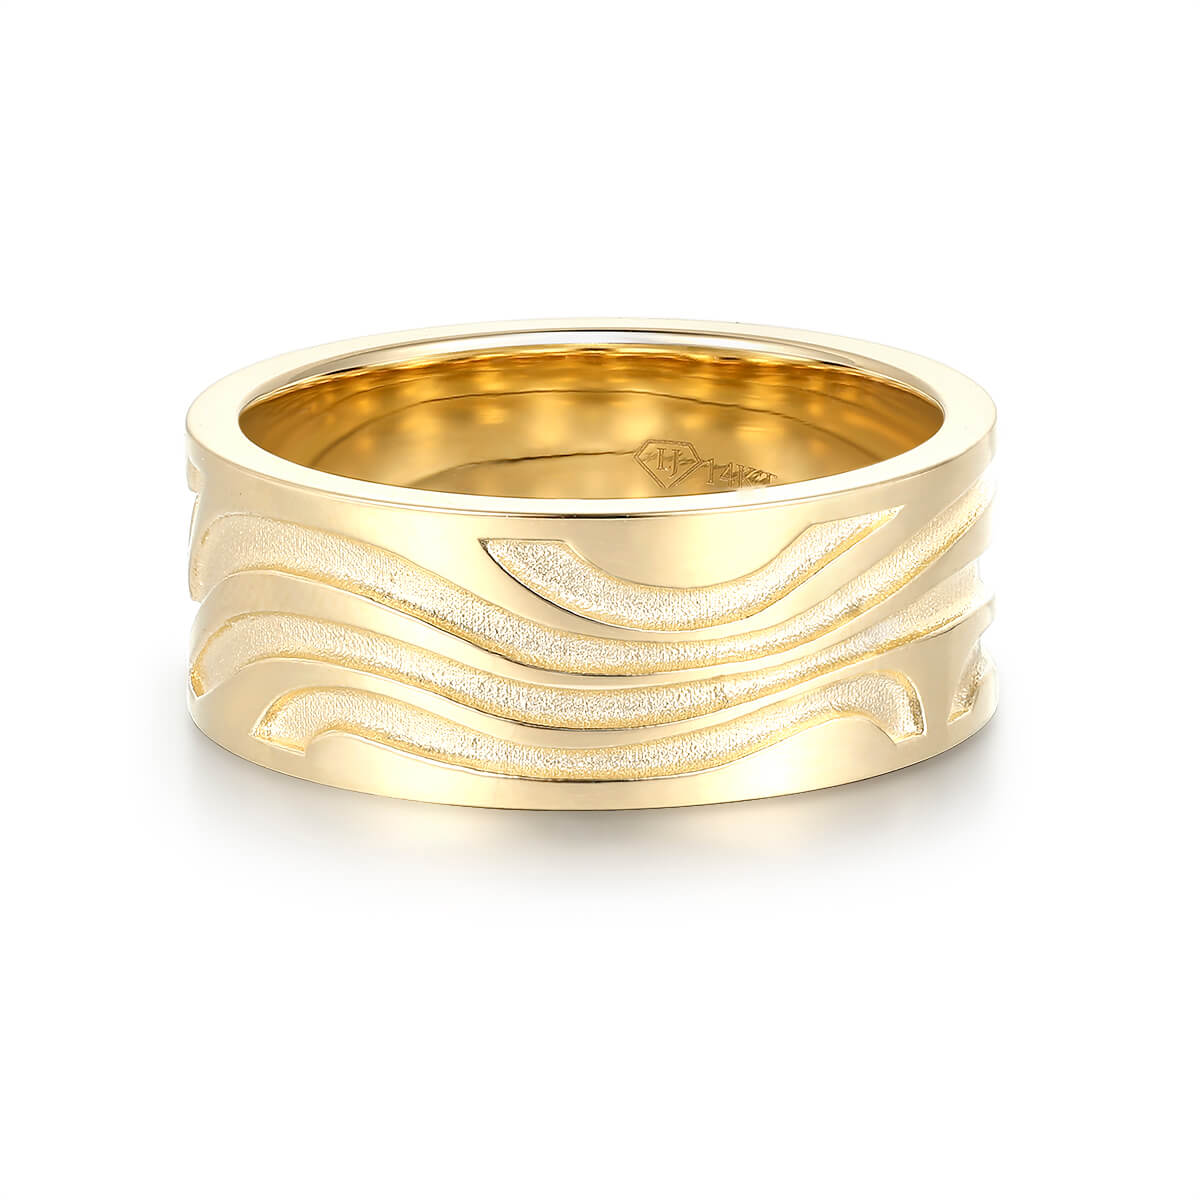 Offset Groove Gold Band - Filigree Jewellery Christchurch, New Zealand